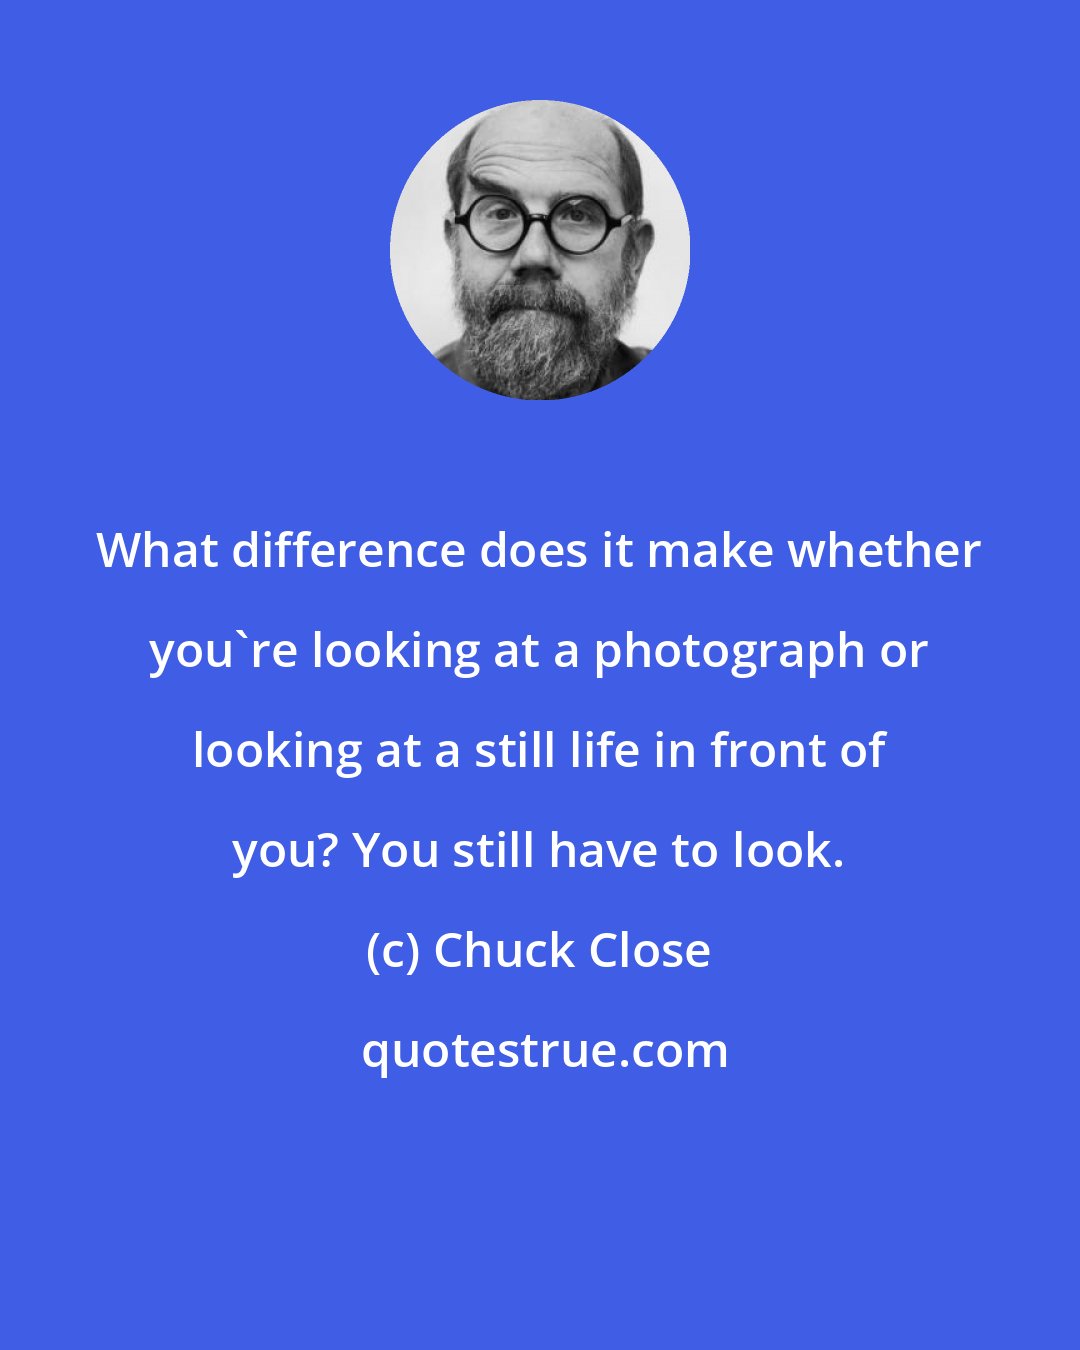 Chuck Close: What difference does it make whether you're looking at a photograph or looking at a still life in front of you? You still have to look.